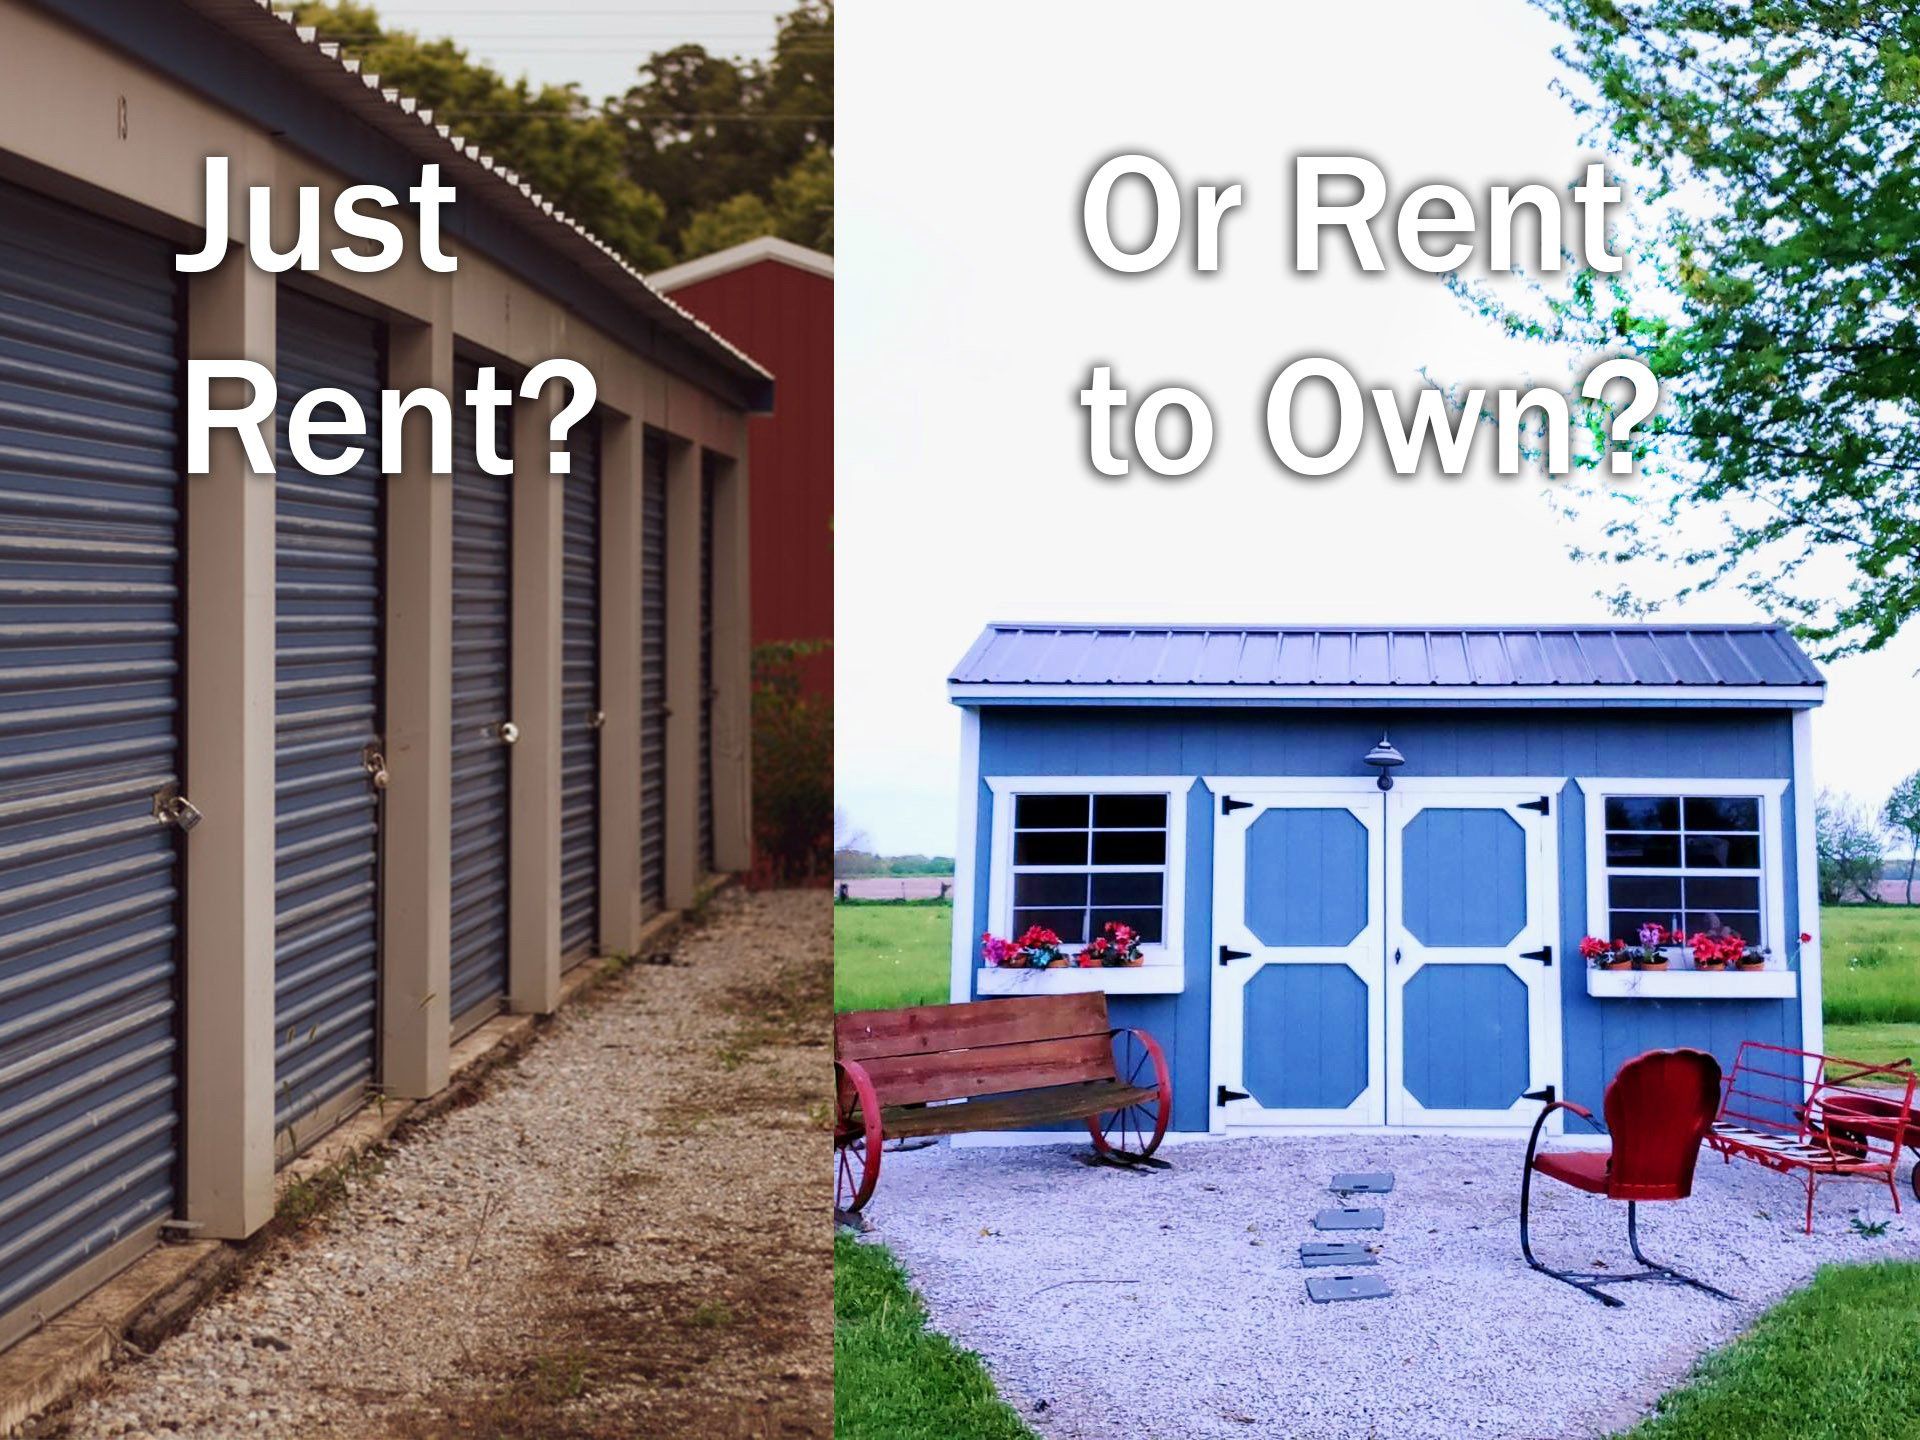 Rent a  storage facility or rent a storage shed?